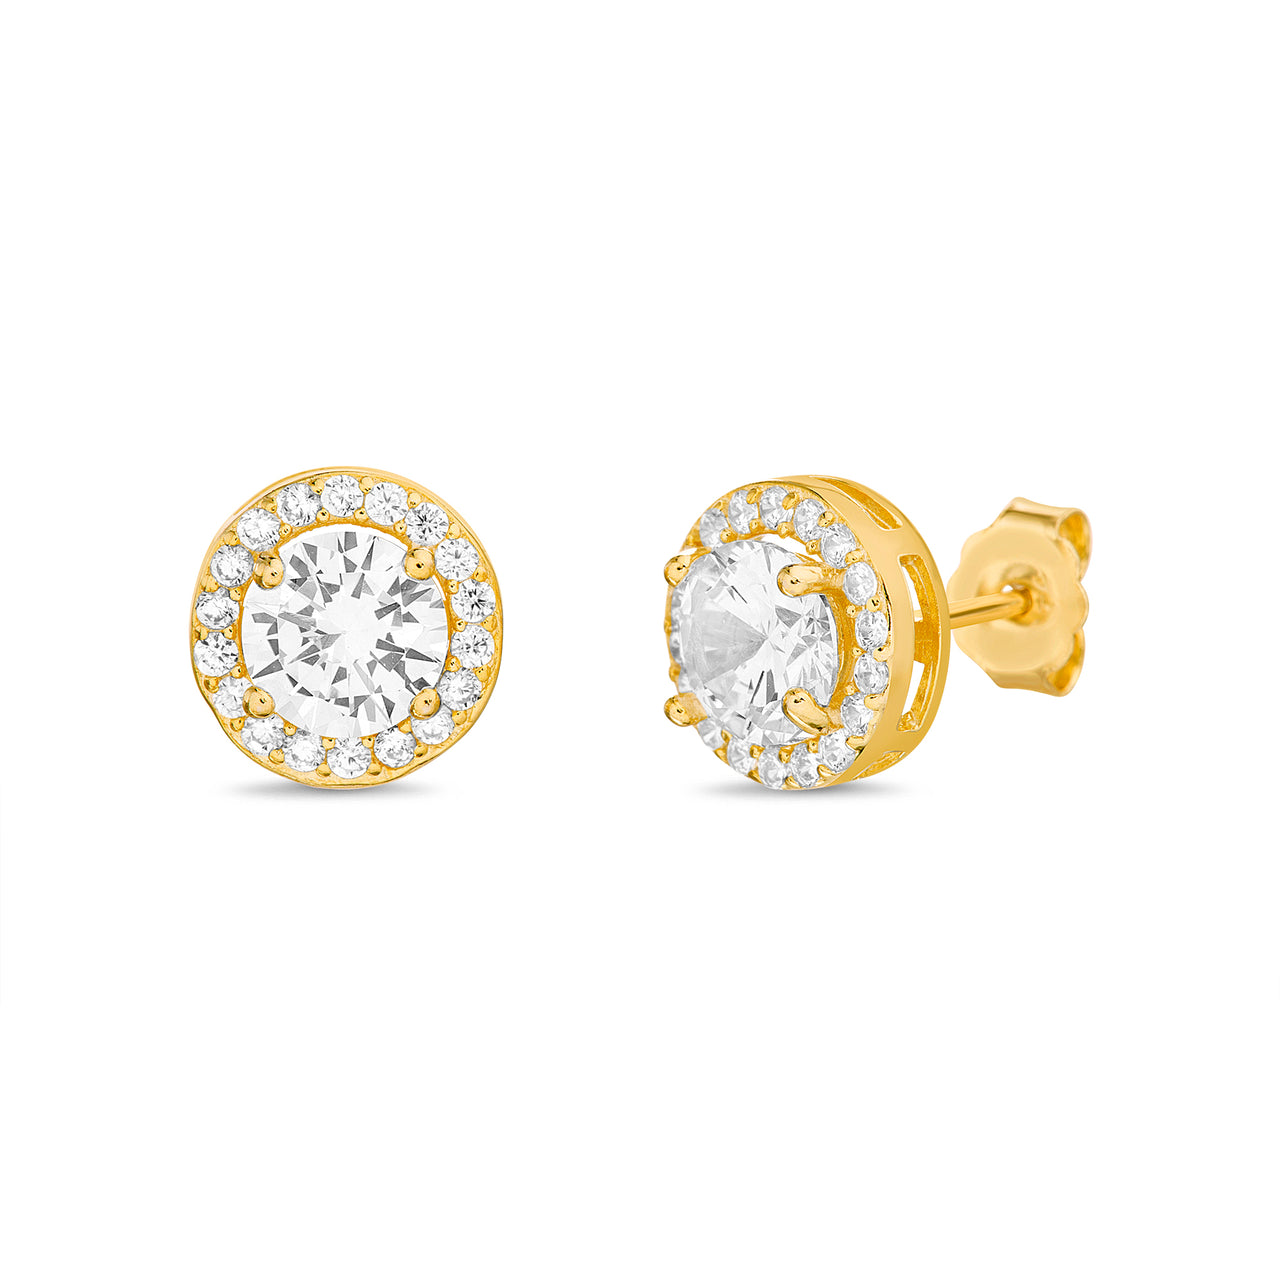 Lesa Michele Yellow Gold Plated Sterling Silver Halo Stud Earrings